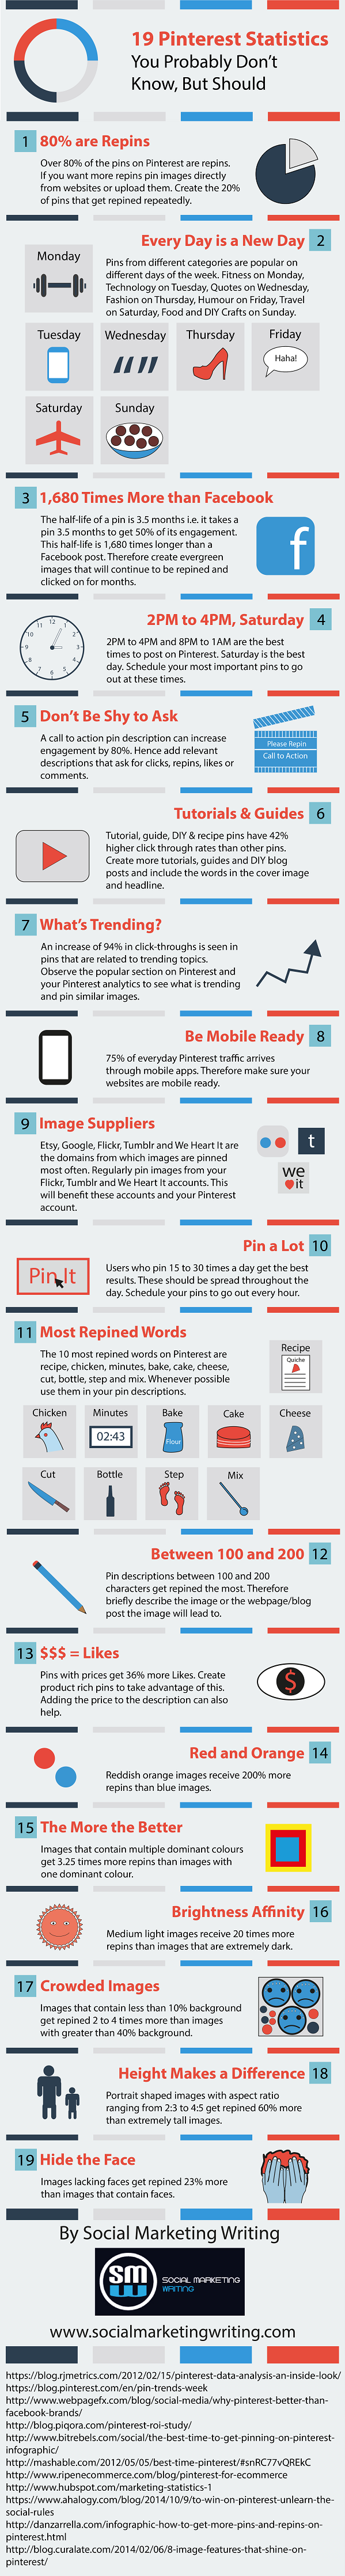 5 Great Articles about Pinterest for Business